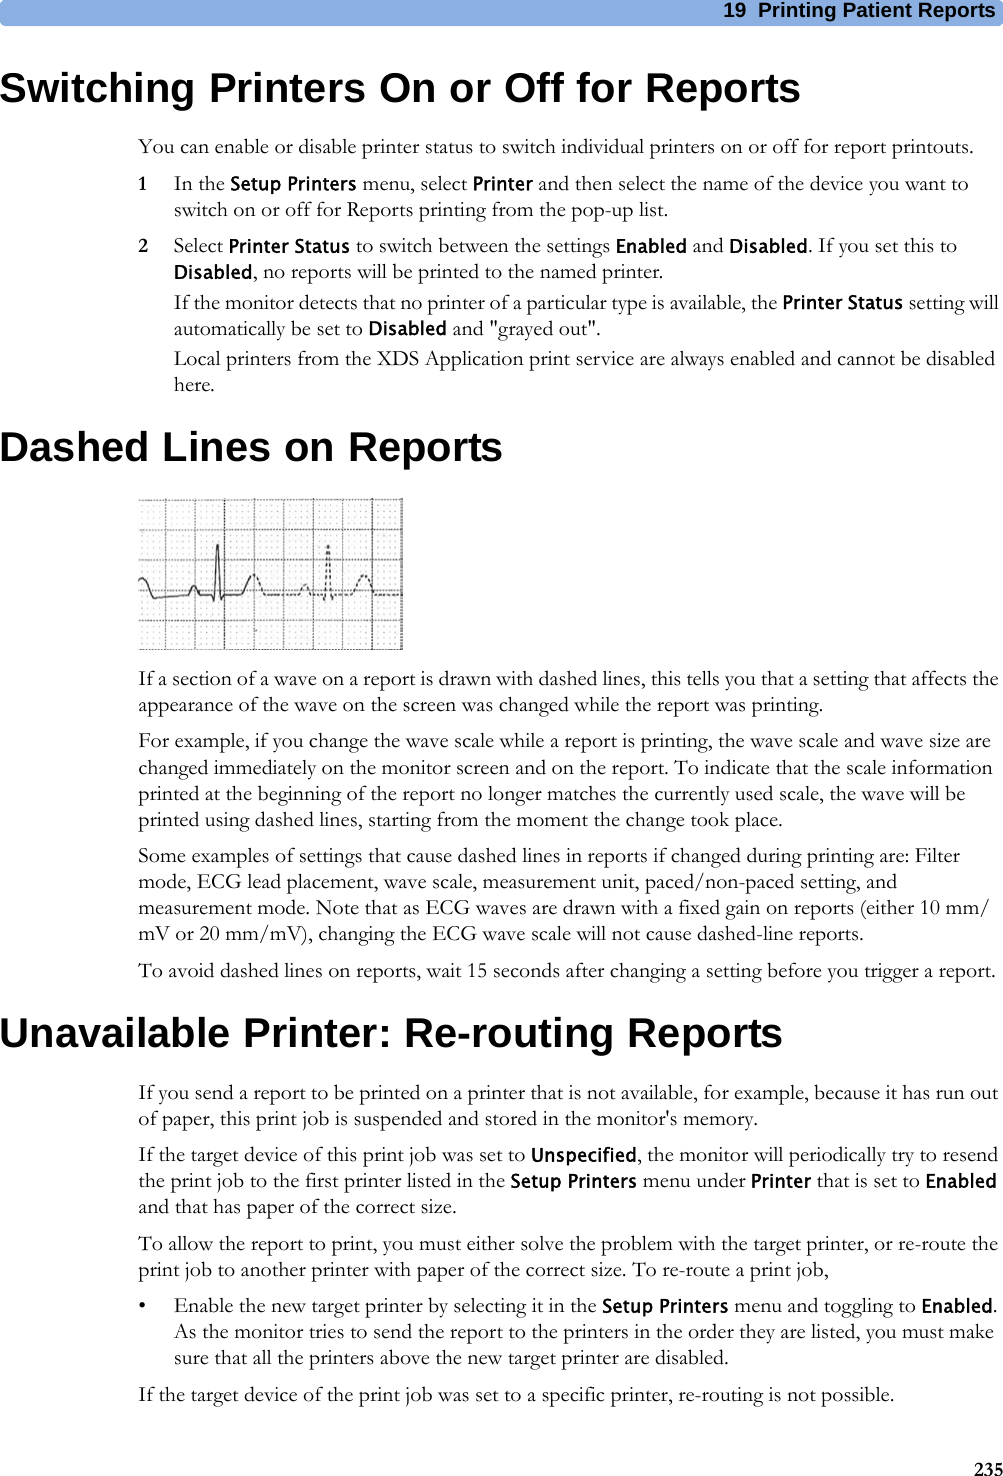 19 Printing Patient Reports235Switching Printers On or Off for ReportsYou can enable or disable printer status to switch individual printers on or off for report printouts.1In the Setup Printers menu, select Printer and then select the name of the device you want to switch on or off for Reports printing from the pop-up list.2Select Printer Status to switch between the settings Enabled and Disabled. If you set this to Disabled, no reports will be printed to the named printer.If the monitor detects that no printer of a particular type is available, the Printer Status setting will automatically be set to Disabled and &quot;grayed out&quot;.Local printers from the XDS Application print service are always enabled and cannot be disabled here.Dashed Lines on ReportsIf a section of a wave on a report is drawn with dashed lines, this tells you that a setting that affects the appearance of the wave on the screen was changed while the report was printing.For example, if you change the wave scale while a report is printing, the wave scale and wave size are changed immediately on the monitor screen and on the report. To indicate that the scale information printed at the beginning of the report no longer matches the currently used scale, the wave will be printed using dashed lines, starting from the moment the change took place.Some examples of settings that cause dashed lines in reports if changed during printing are: Filter mode, ECG lead placement, wave scale, measurement unit, paced/non-paced setting, and measurement mode. Note that as ECG waves are drawn with a fixed gain on reports (either 10 mm/mV or 20 mm/mV), changing the ECG wave scale will not cause dashed-line reports.To avoid dashed lines on reports, wait 15 seconds after changing a setting before you trigger a report.Unavailable Printer: Re-routing ReportsIf you send a report to be printed on a printer that is not available, for example, because it has run out of paper, this print job is suspended and stored in the monitor&apos;s memory.If the target device of this print job was set to Unspecified, the monitor will periodically try to resend the print job to the first printer listed in the Setup Printers menu under Printer that is set to Enabled and that has paper of the correct size.To allow the report to print, you must either solve the problem with the target printer, or re-route the print job to another printer with paper of the correct size. To re-route a print job,• Enable the new target printer by selecting it in the Setup Printers menu and toggling to Enabled. As the monitor tries to send the report to the printers in the order they are listed, you must make sure that all the printers above the new target printer are disabled.If the target device of the print job was set to a specific printer, re-routing is not possible.